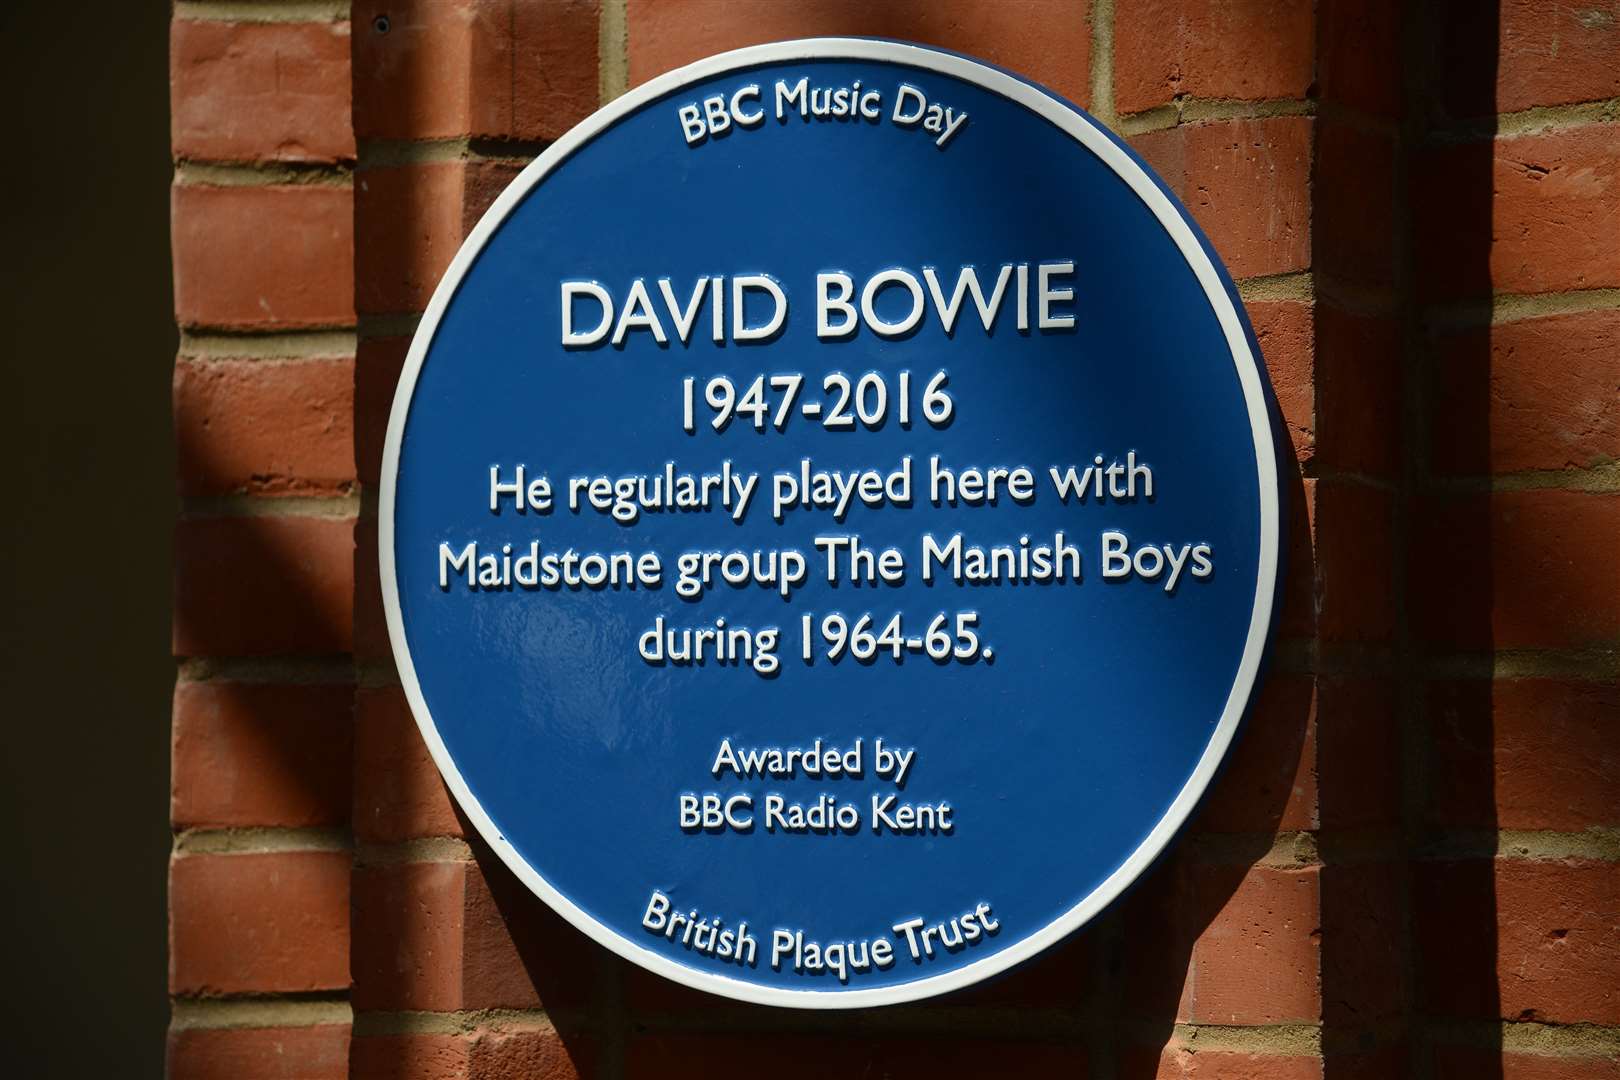 The new blue plaque to Bowie in The Royal Star Arcade